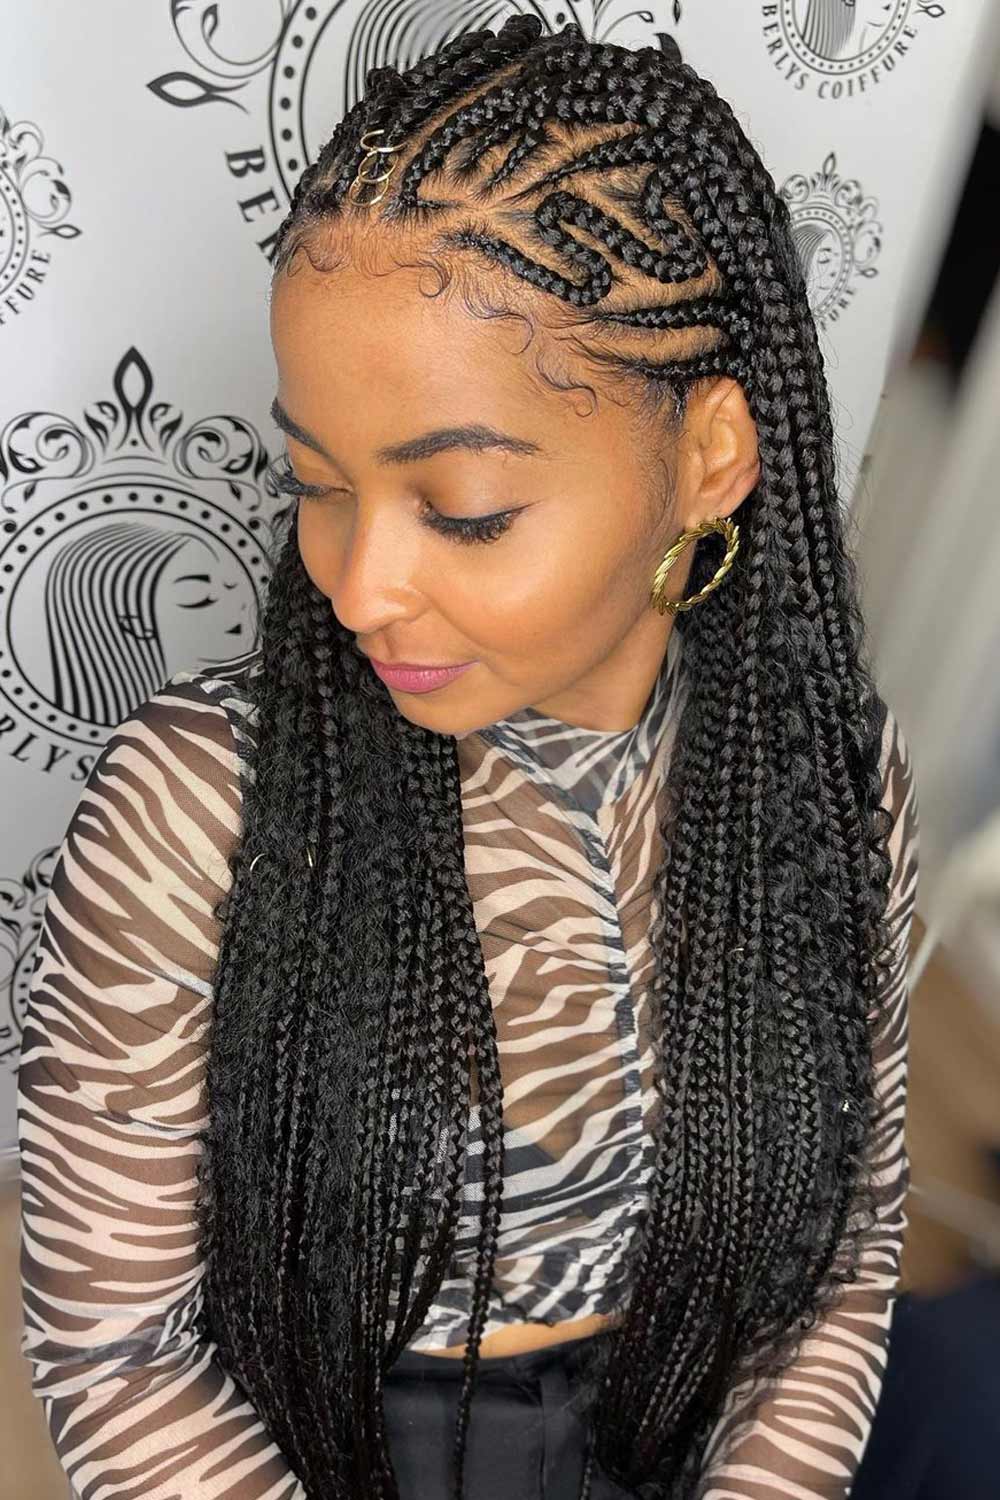 Stylish Ways To Get Your Edges Hair Looking As Fly As Ever - Love Hairstyle